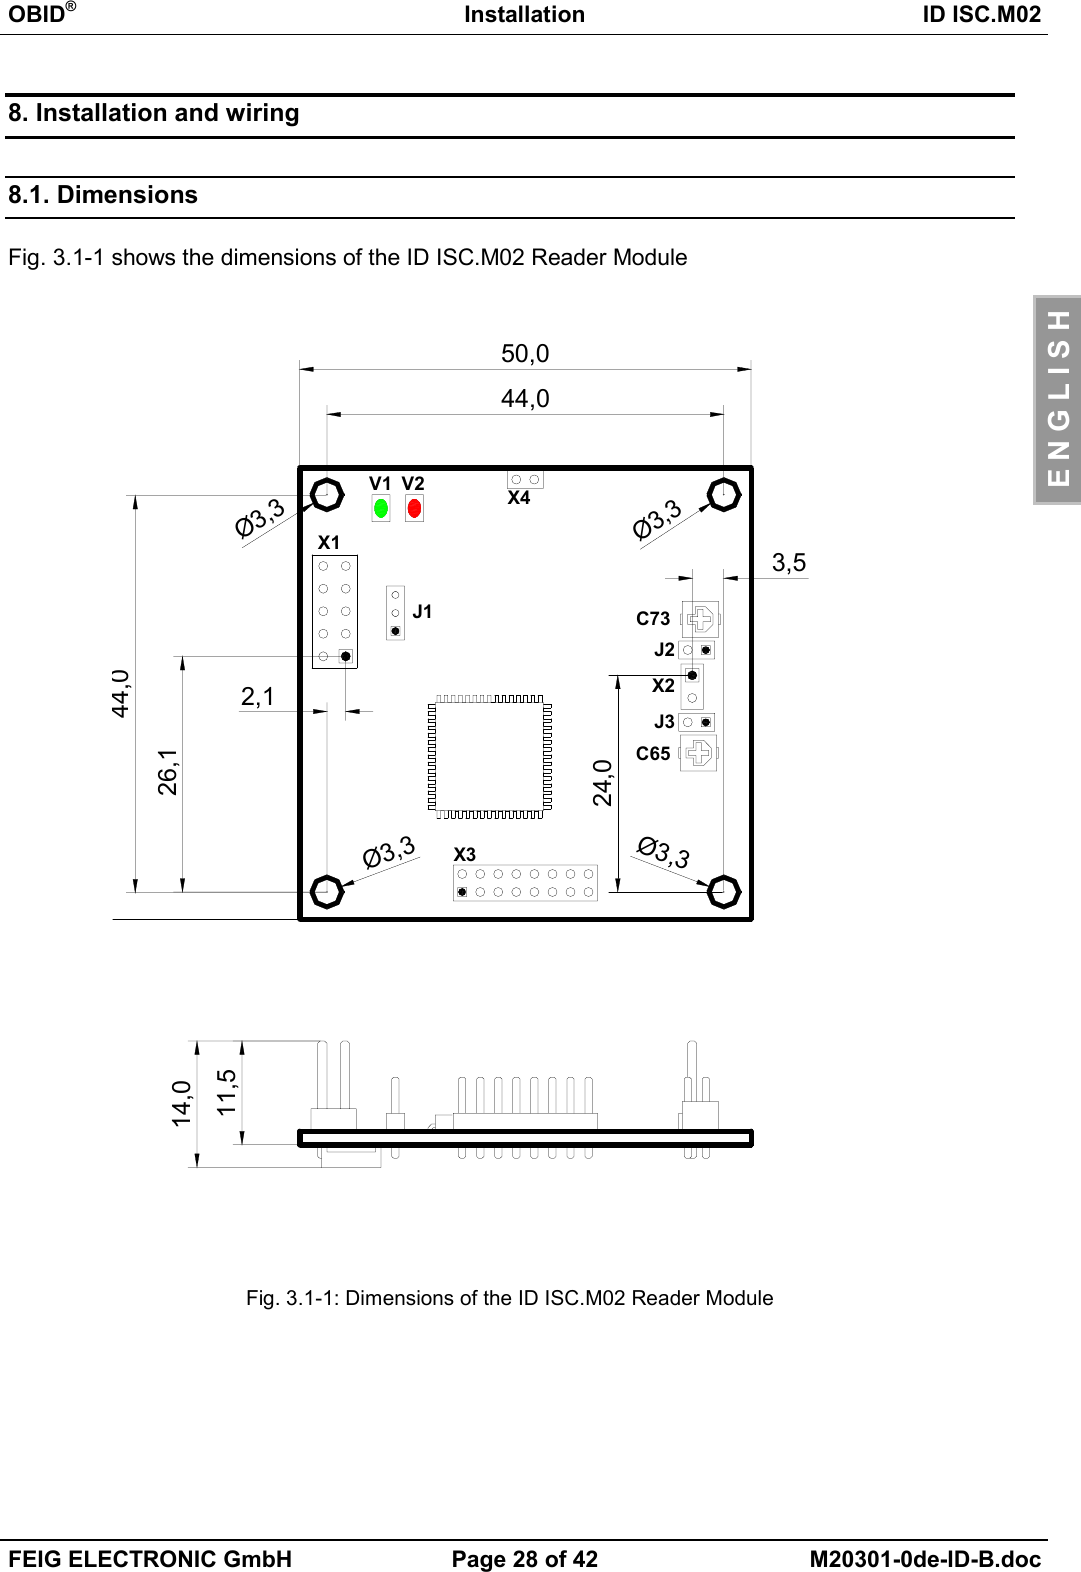 OBID®Installation ID ISC.M02FEIG ELECTRONIC GmbH Page 28 of 42 M20301-0de-ID-B.docE N G L I S H8. Installation and wiring8.1. DimensionsFig. 3.1-1 shows the dimensions of the ID ISC.M02 Reader ModuleFig. 3.1-1: Dimensions of the ID ISC.M02 Reader Module26,12,1Ø3,3Ø3,3Ø3,3Ø3,314,011,5J2J3X2X3X444,024,03,5X1J1V2V1C6544,050,0C73